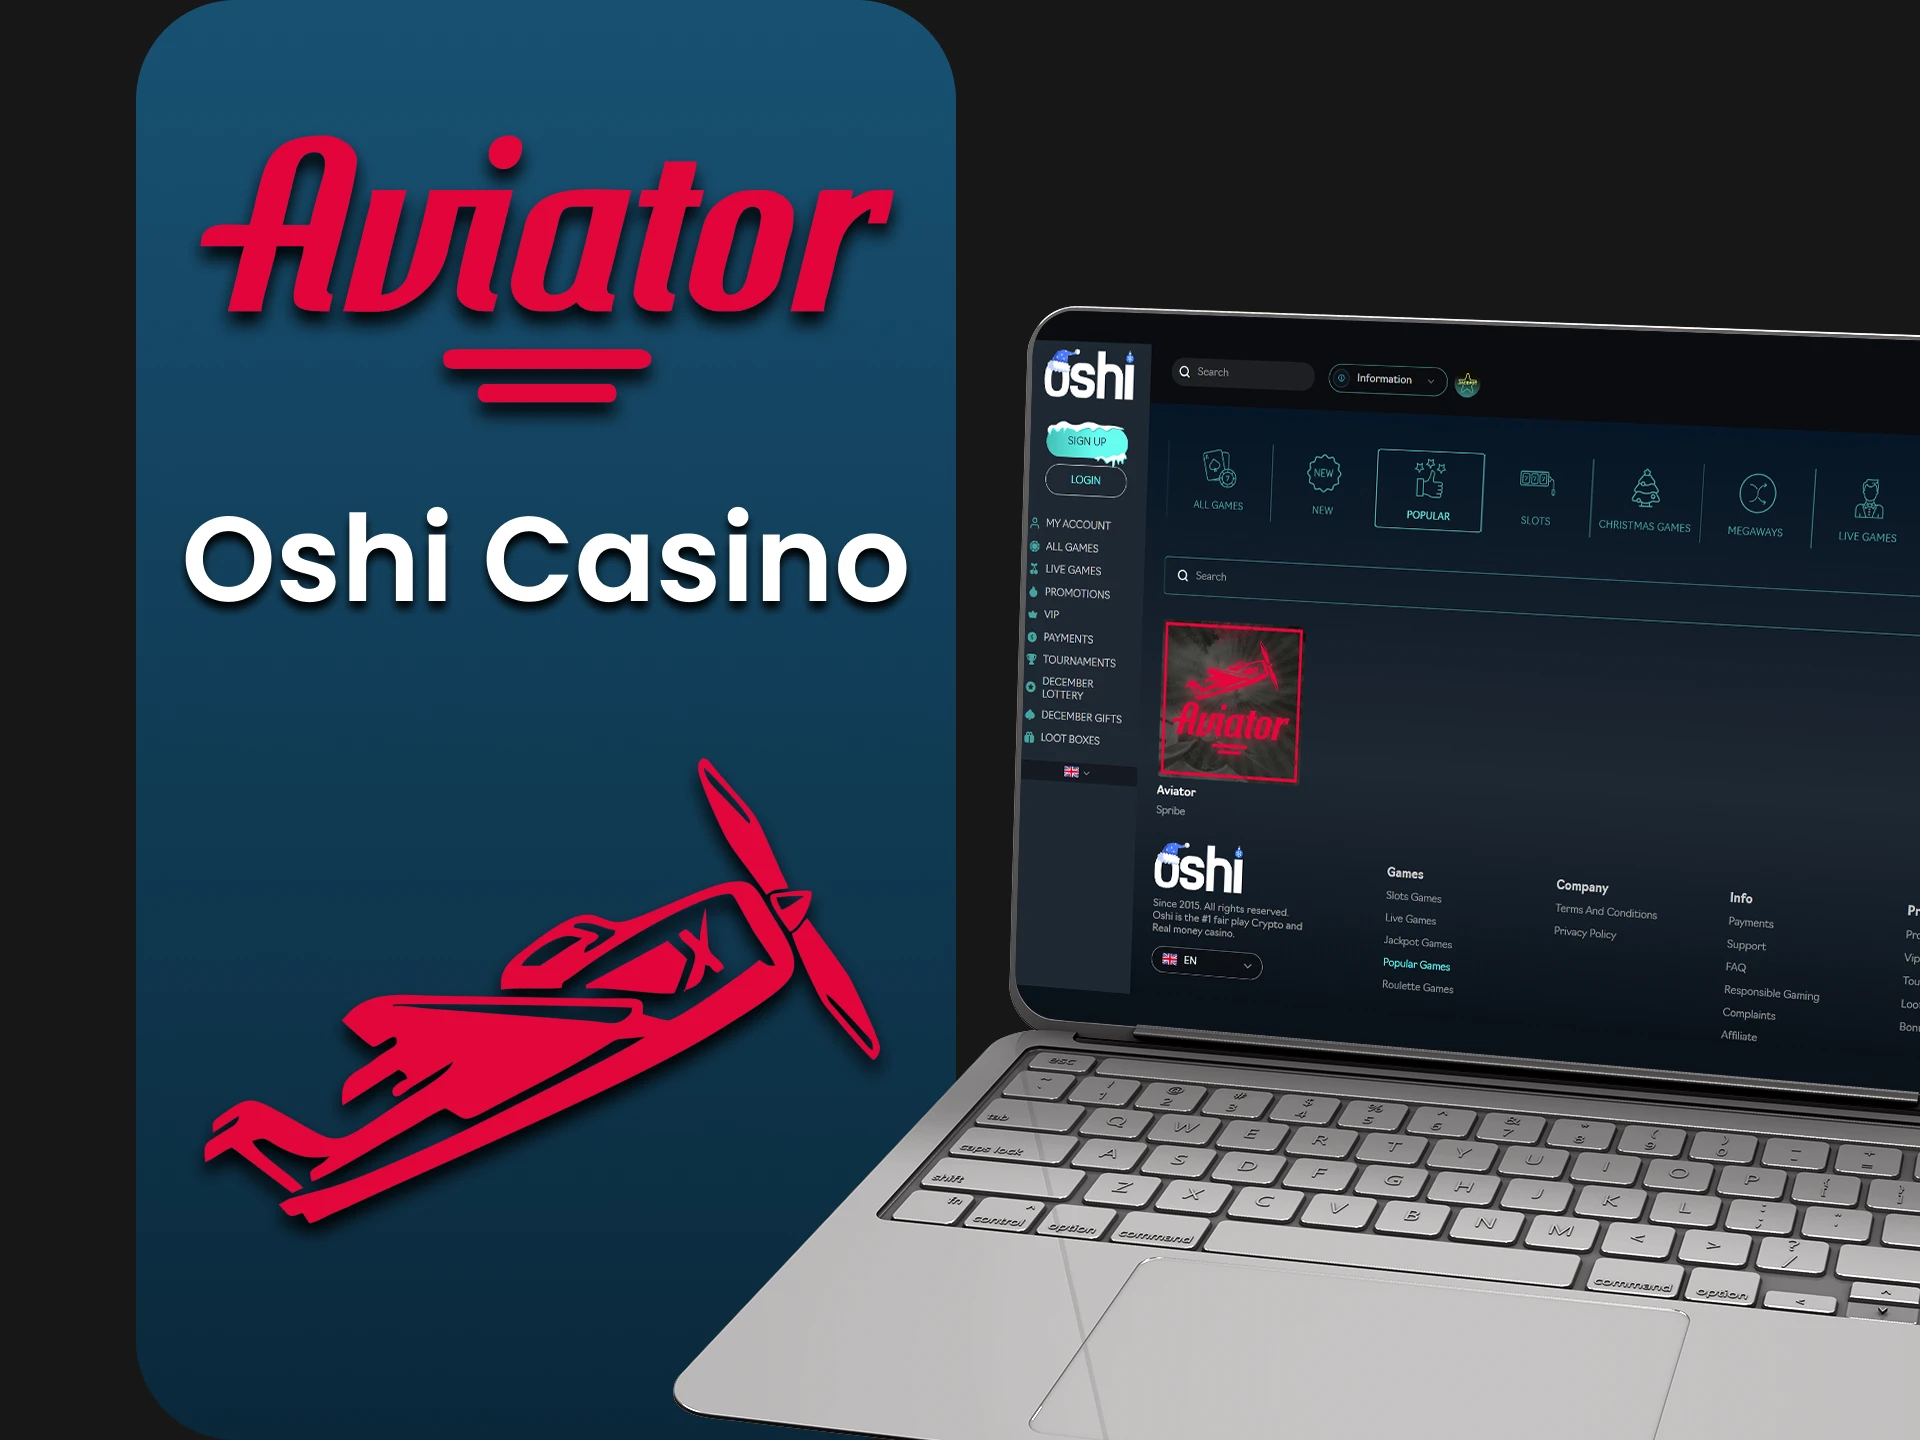 Try playing Aviator on the Oshi service.